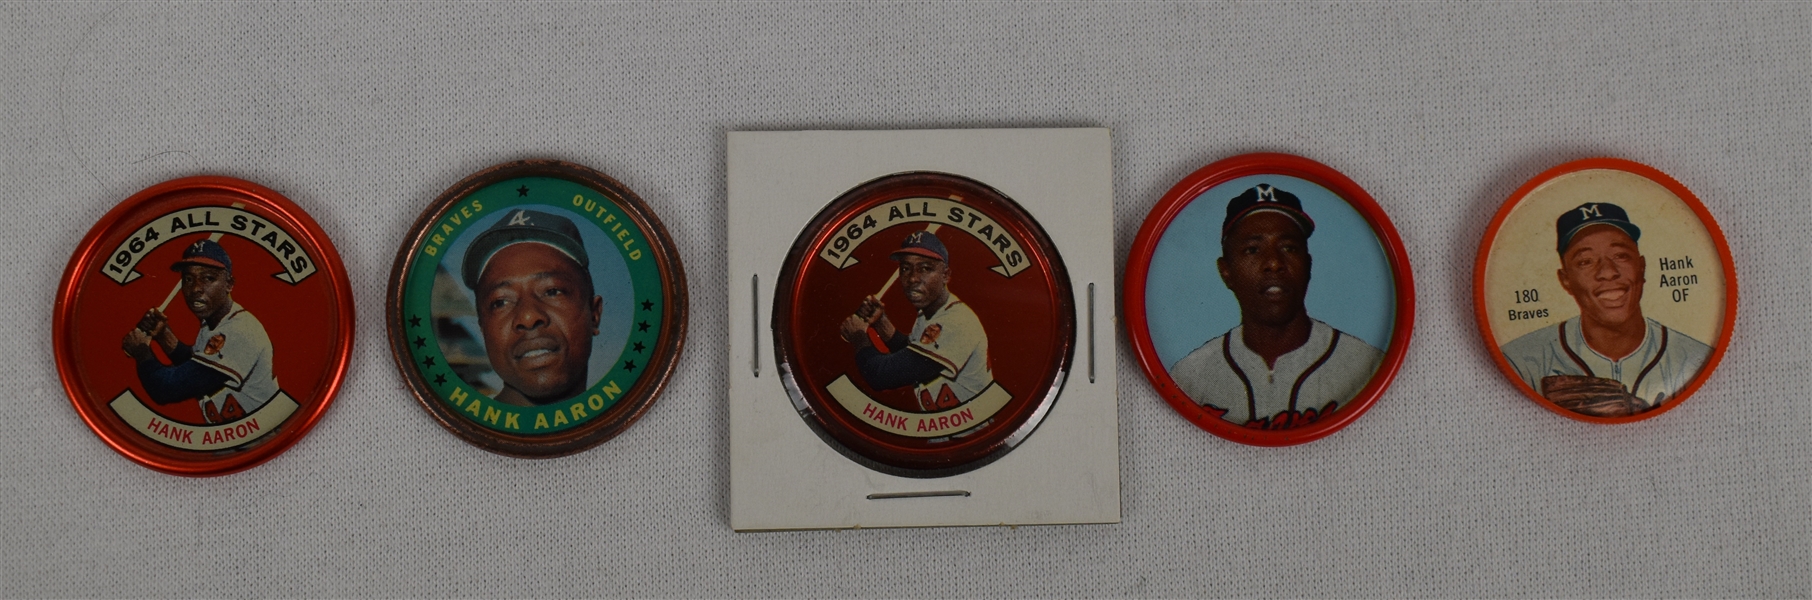 Hank Aaron Vintage 1960s Lot of 5 Topps Coins